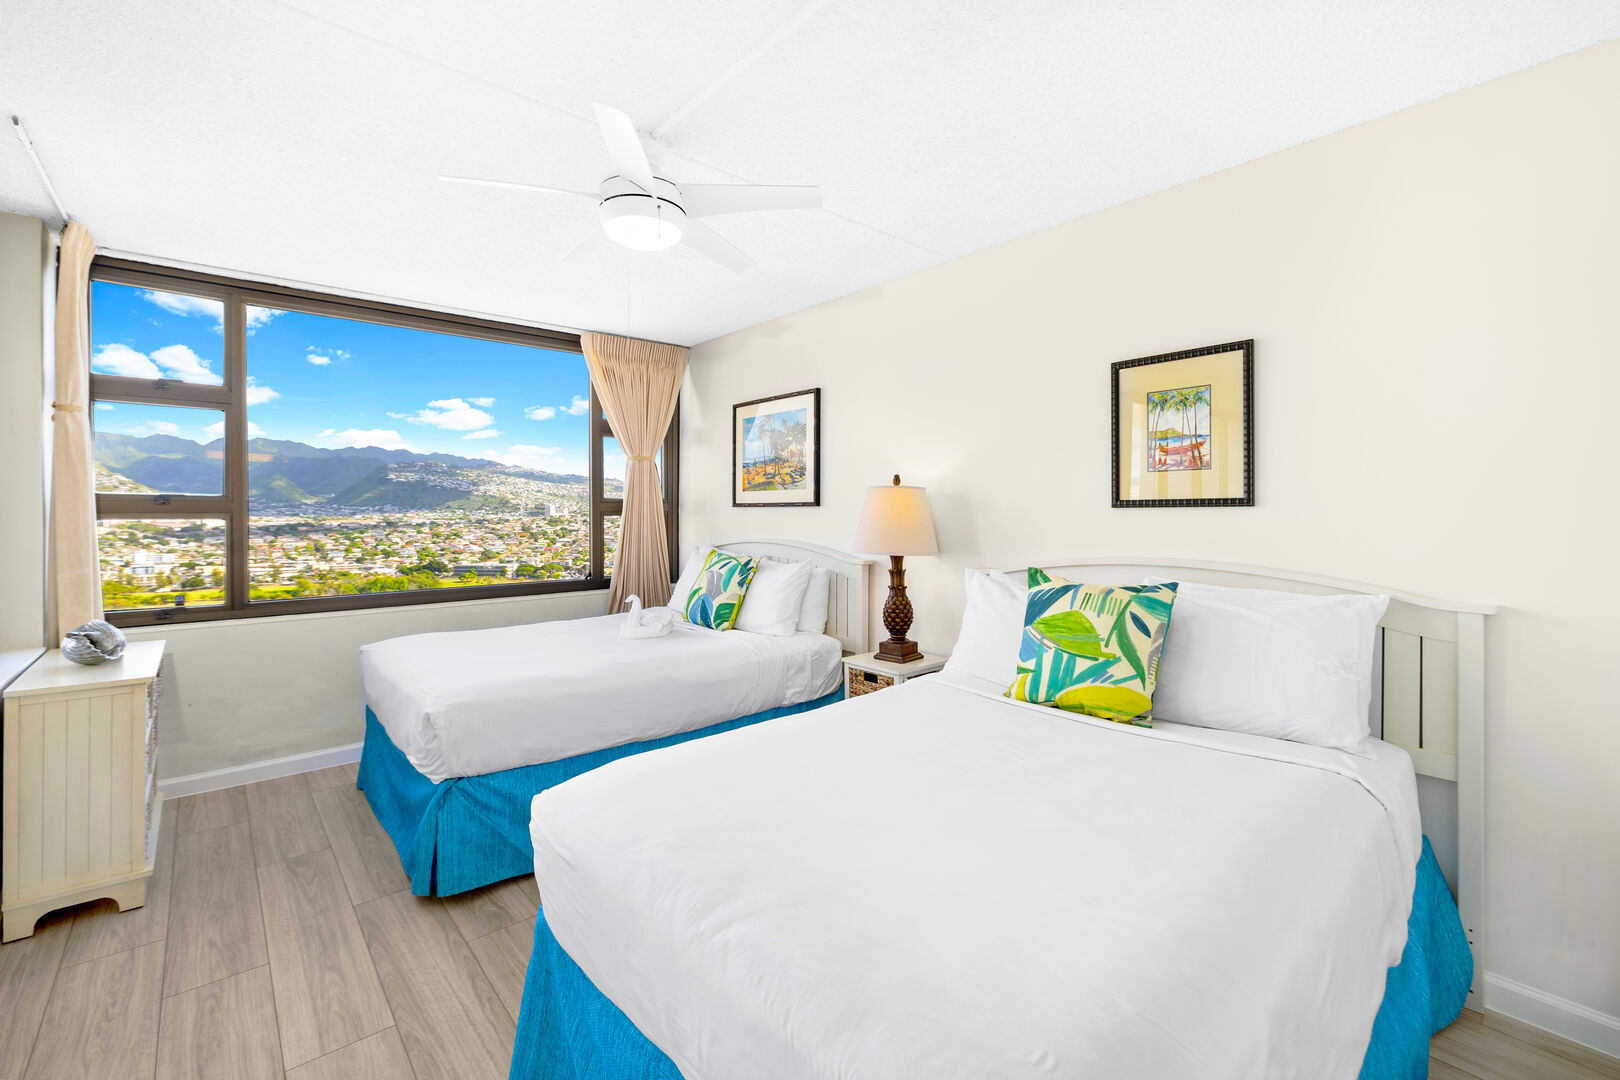 Relax on your bedroom with 2 full-size beds while enjoying the beautiful mountain views from your window!